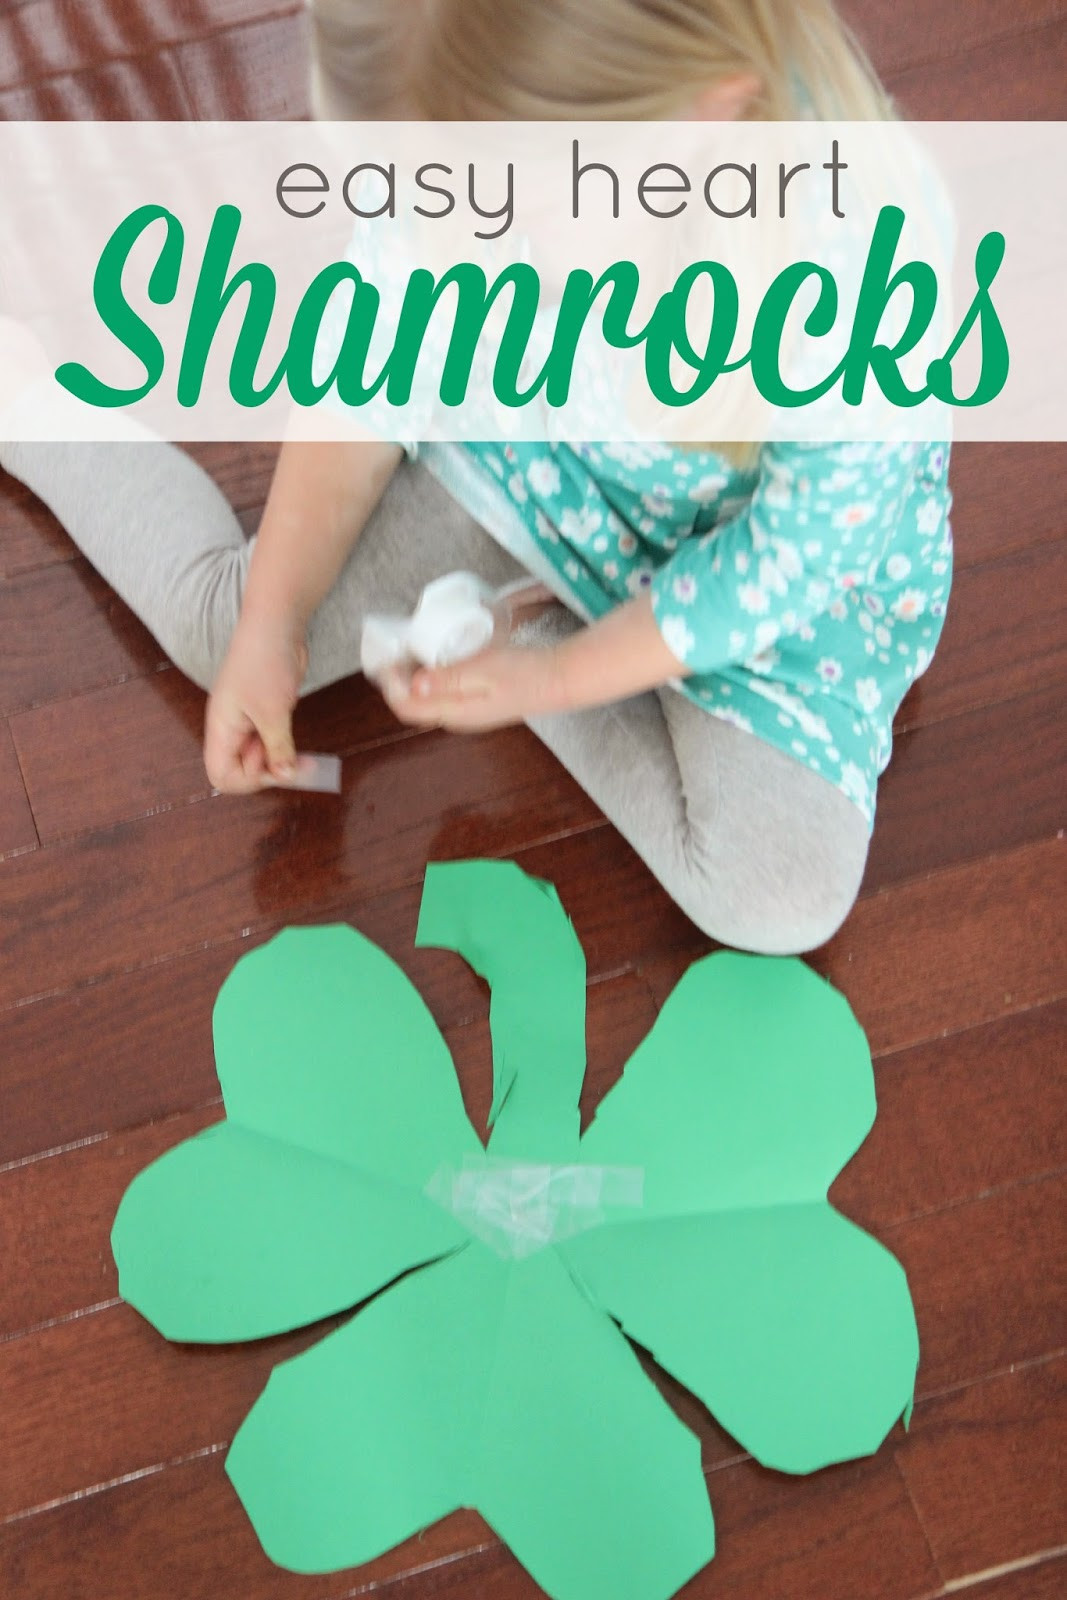 Easy Toddler Crafts
 Toddler Approved 8 Easy St Patrick s Day Crafts for Kids